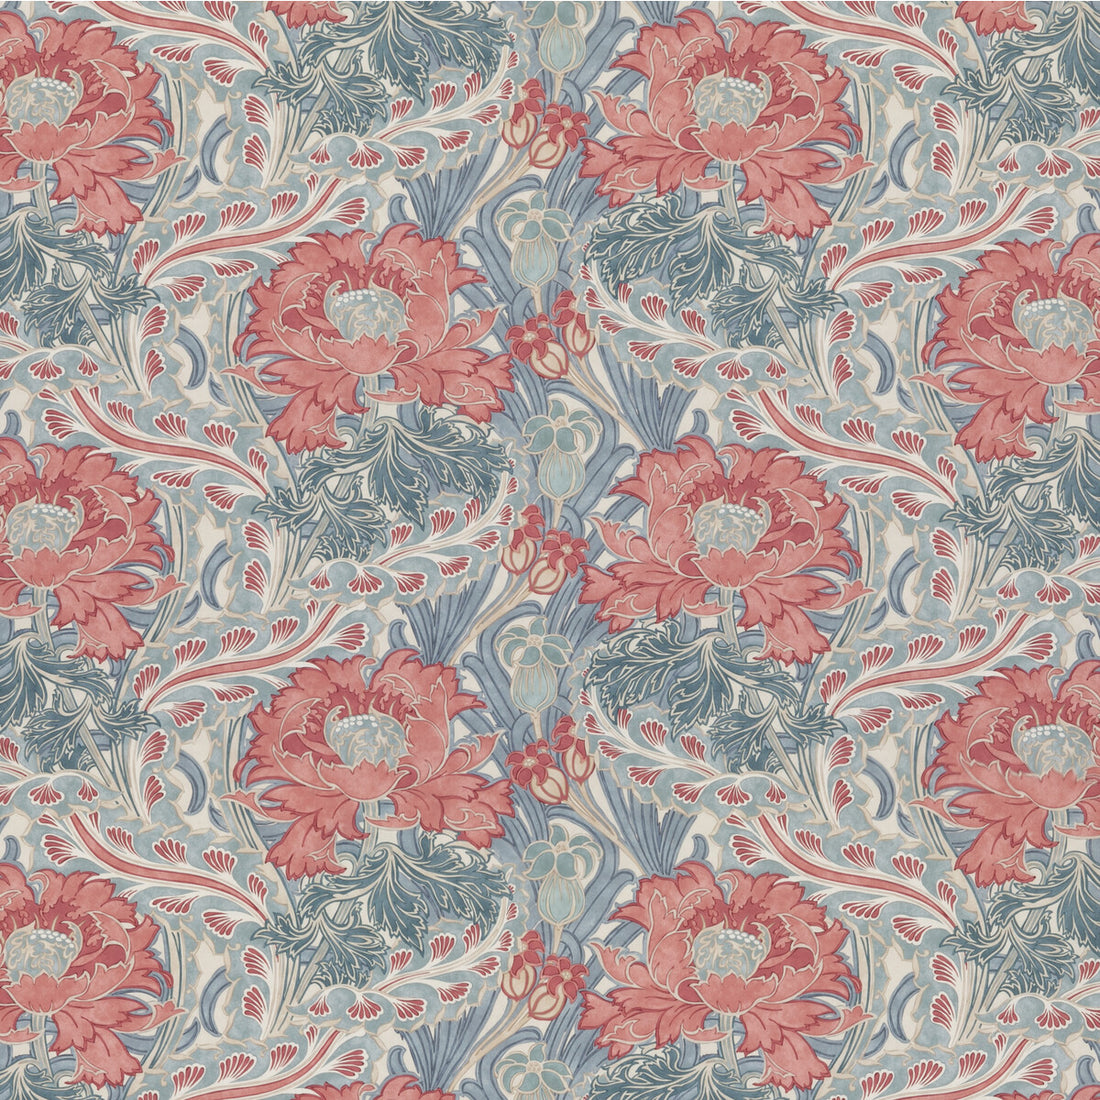 Brantwood Cotton fabric in teal color - pattern BP10969.2.0 - by G P &amp; J Baker in the Original Brantwood Fabric collection